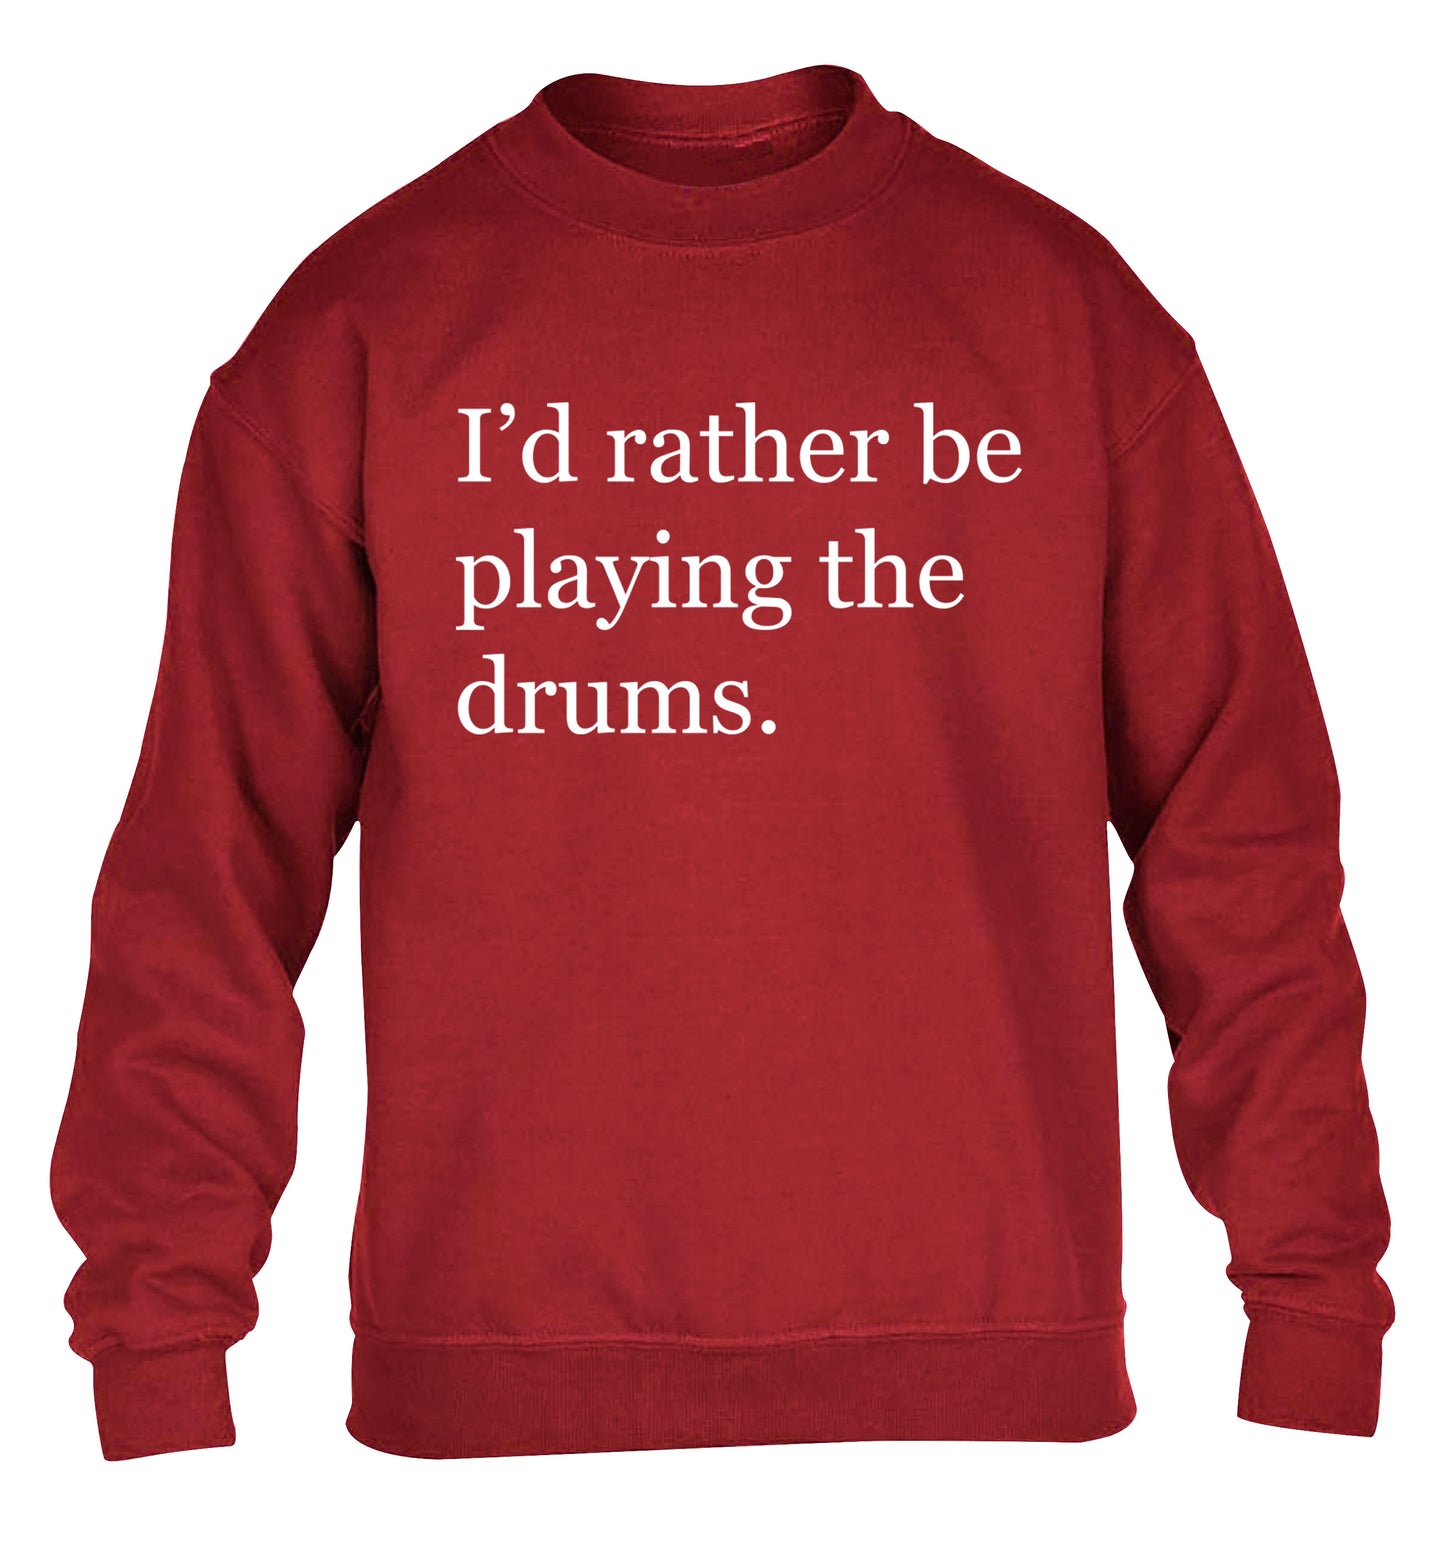 I'd rather be playing the drums children's grey sweater 12-14 Years